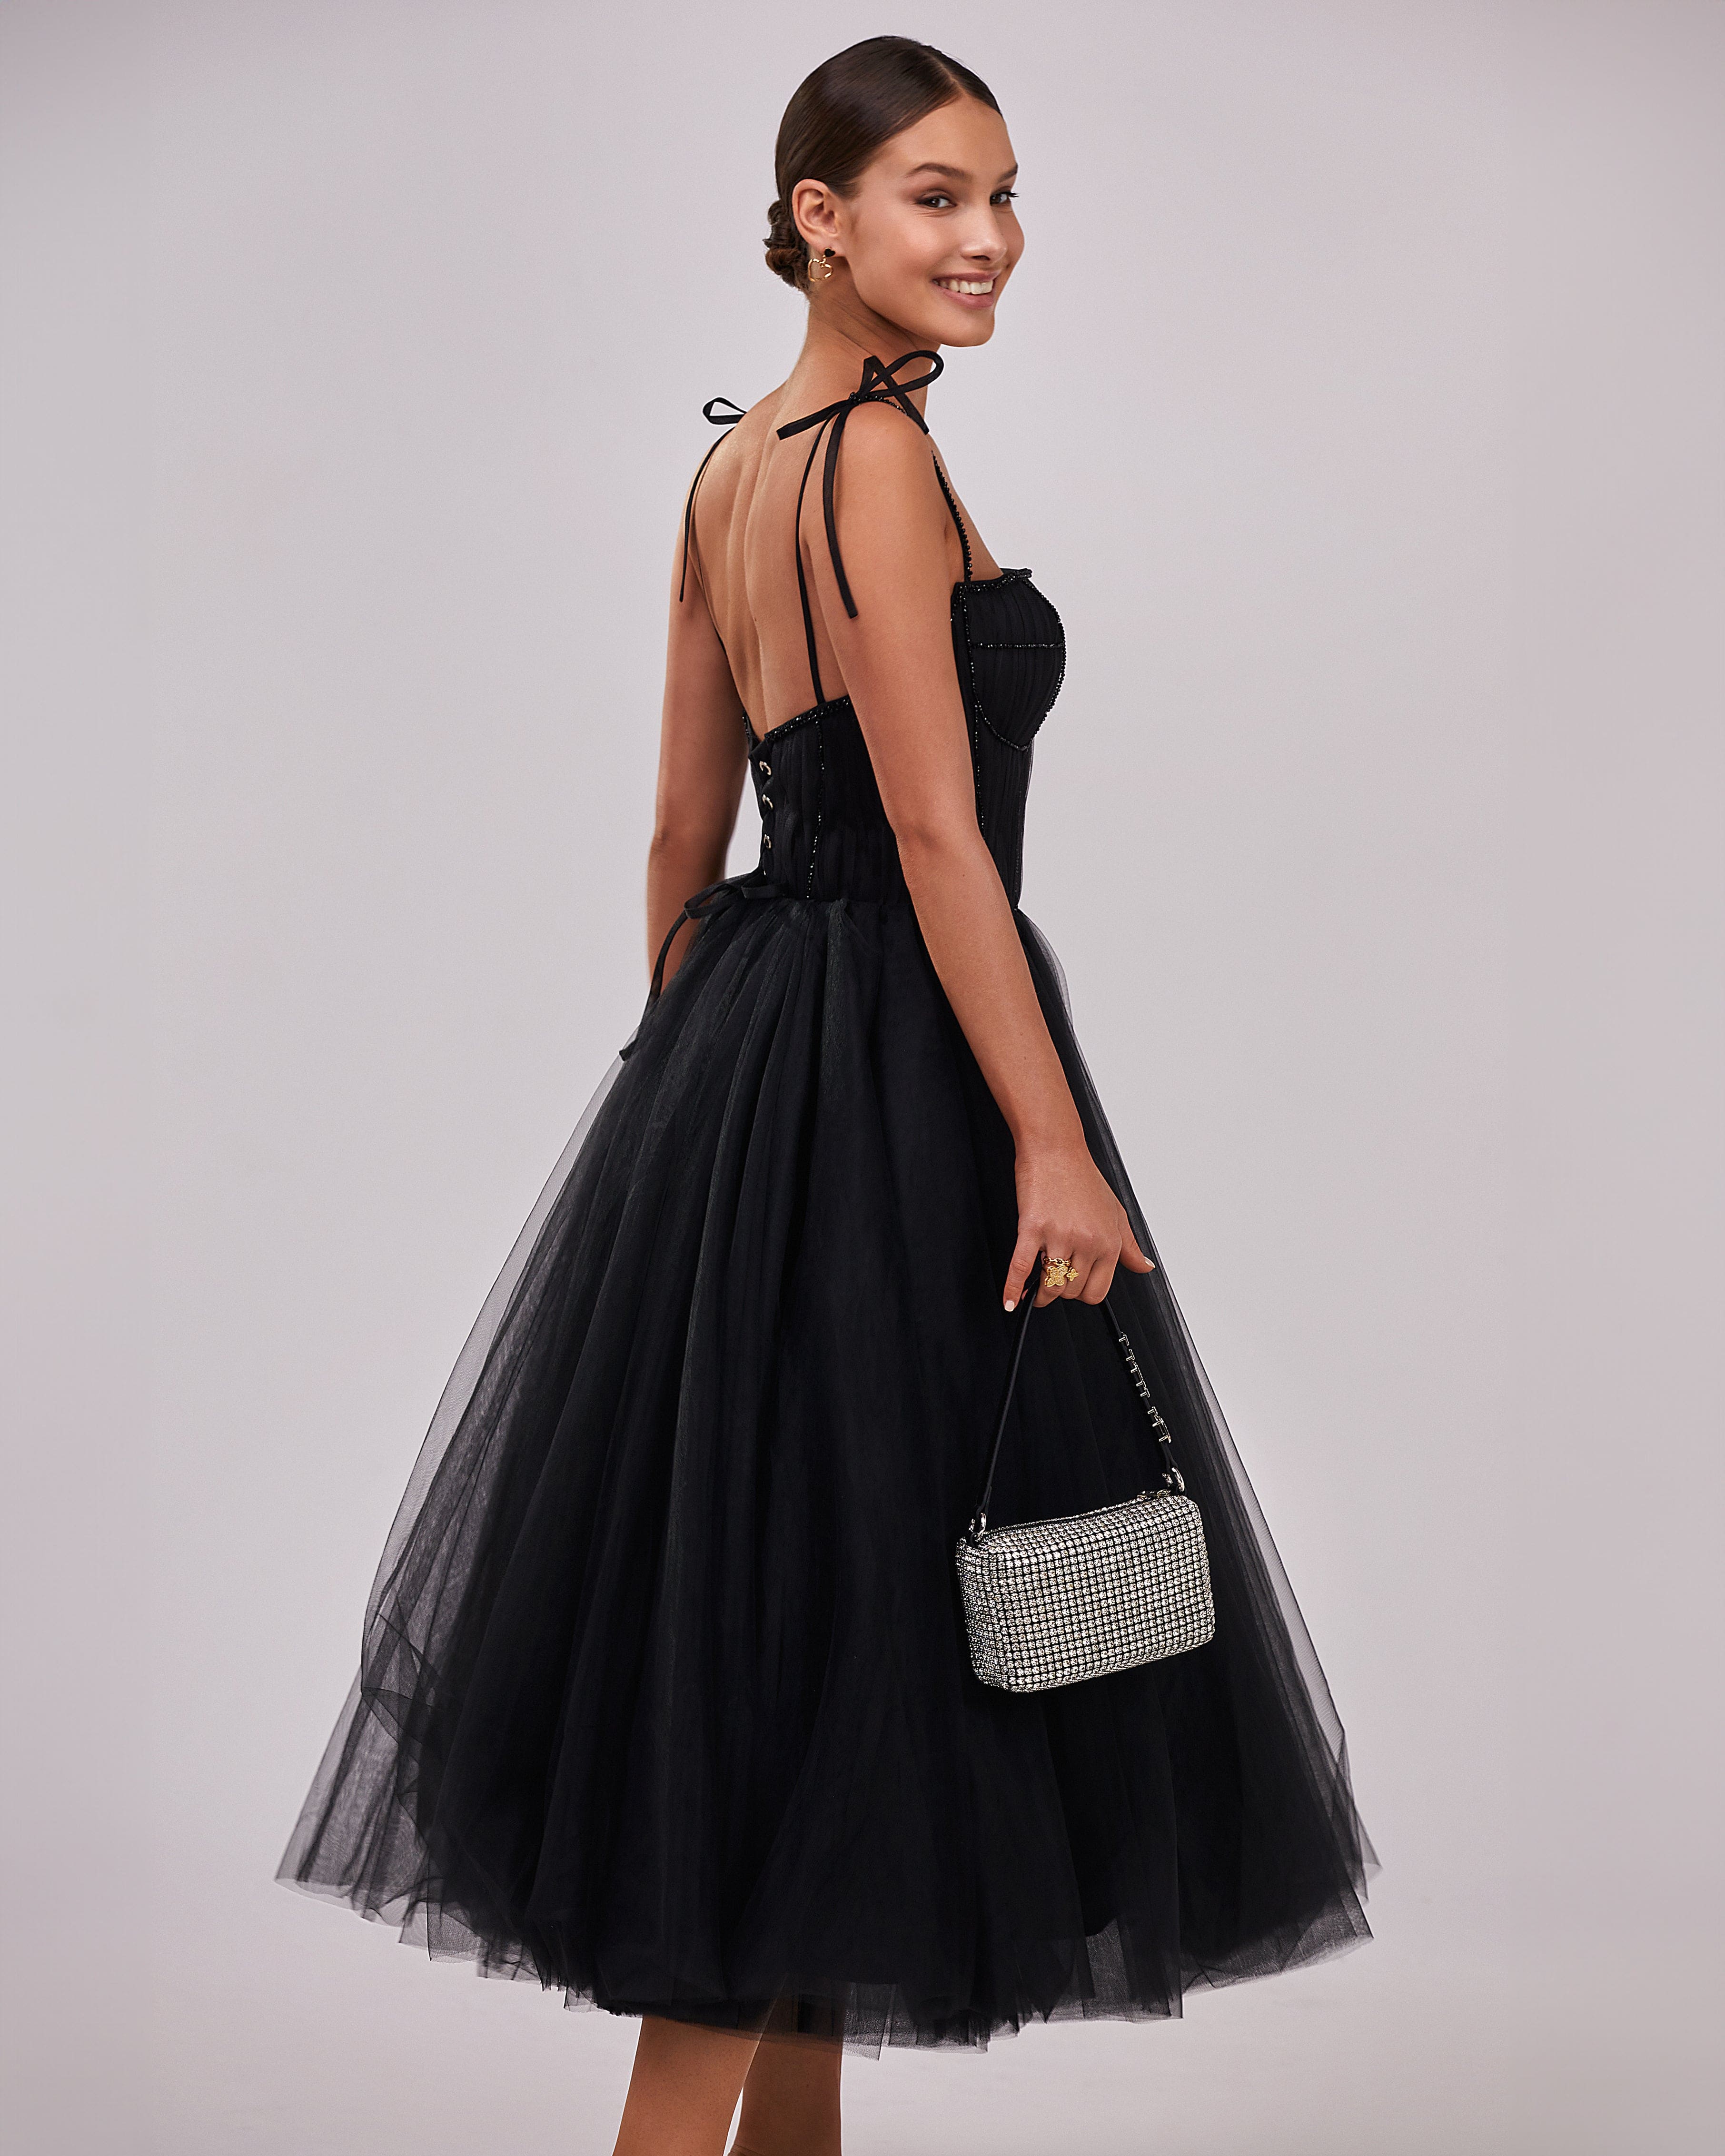 Black Tie-strap cocktail dress with the elegant corset embroidery